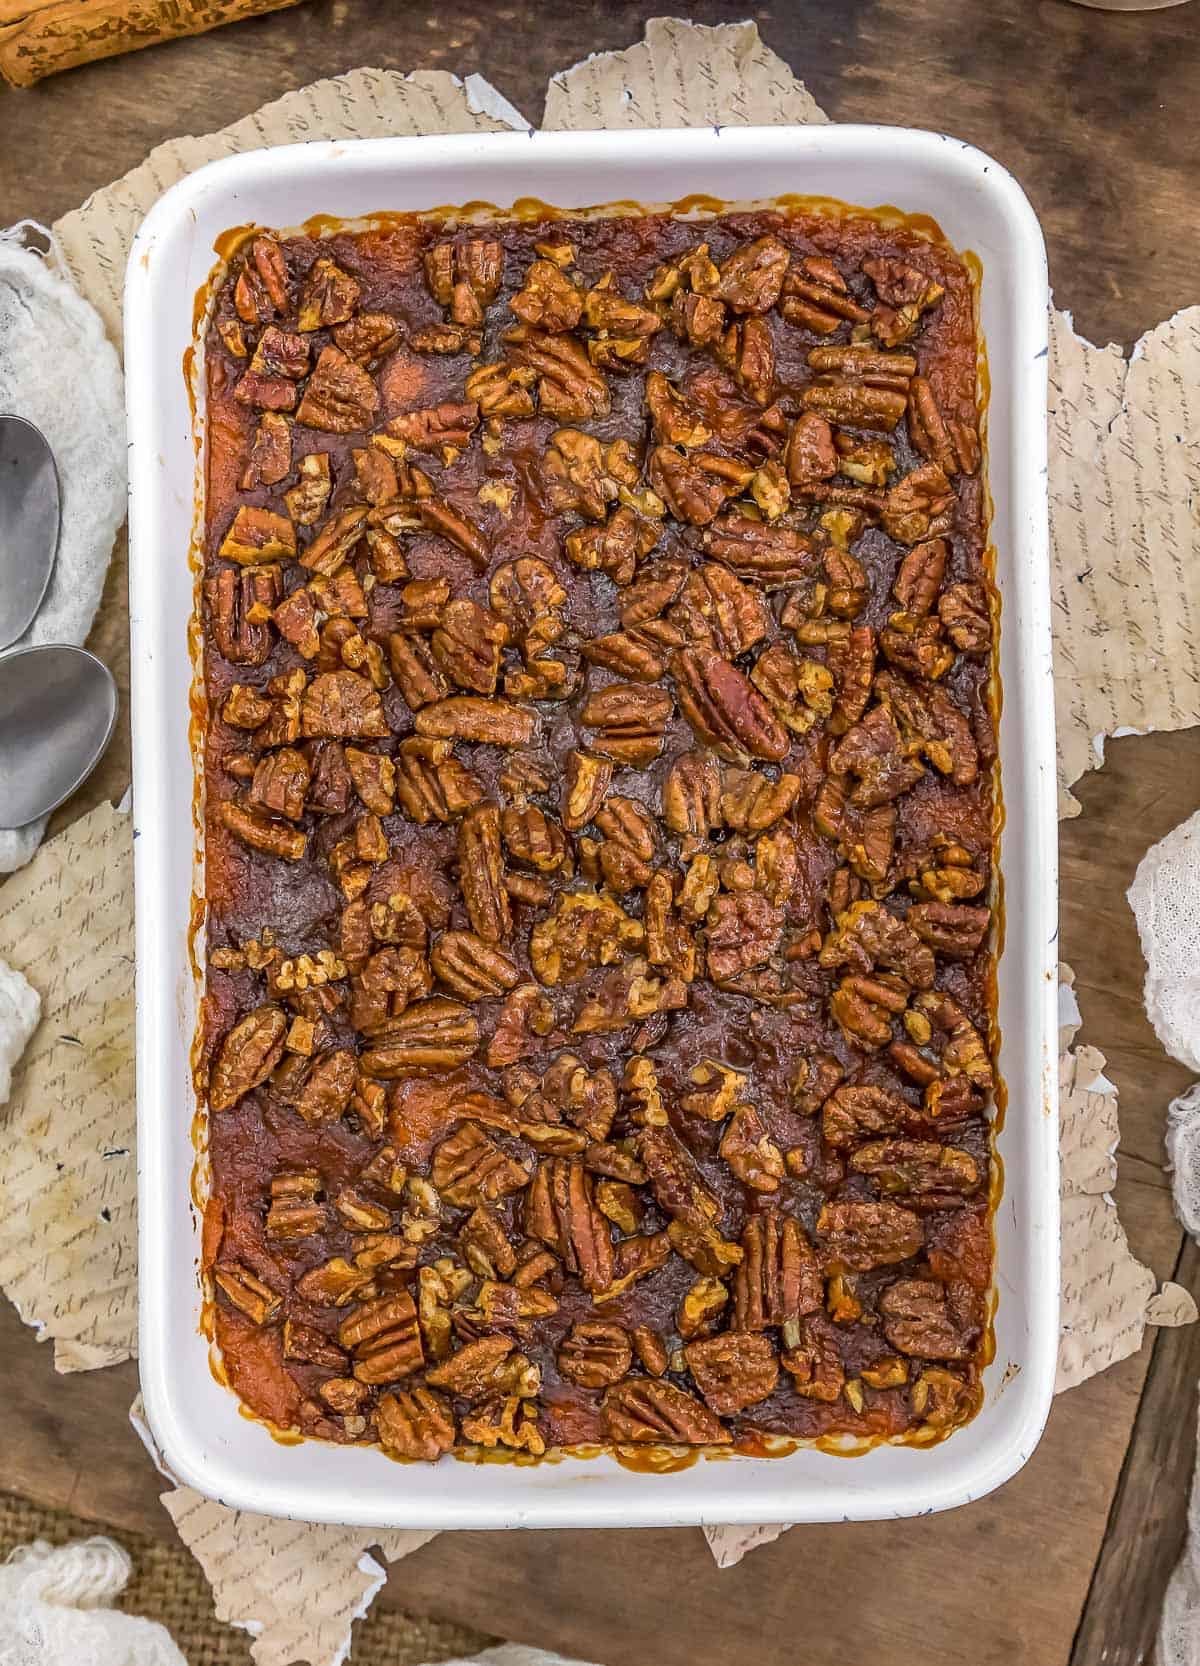 Top view of Vegan Sweet Potato Casserole with Candied Pecan Topping